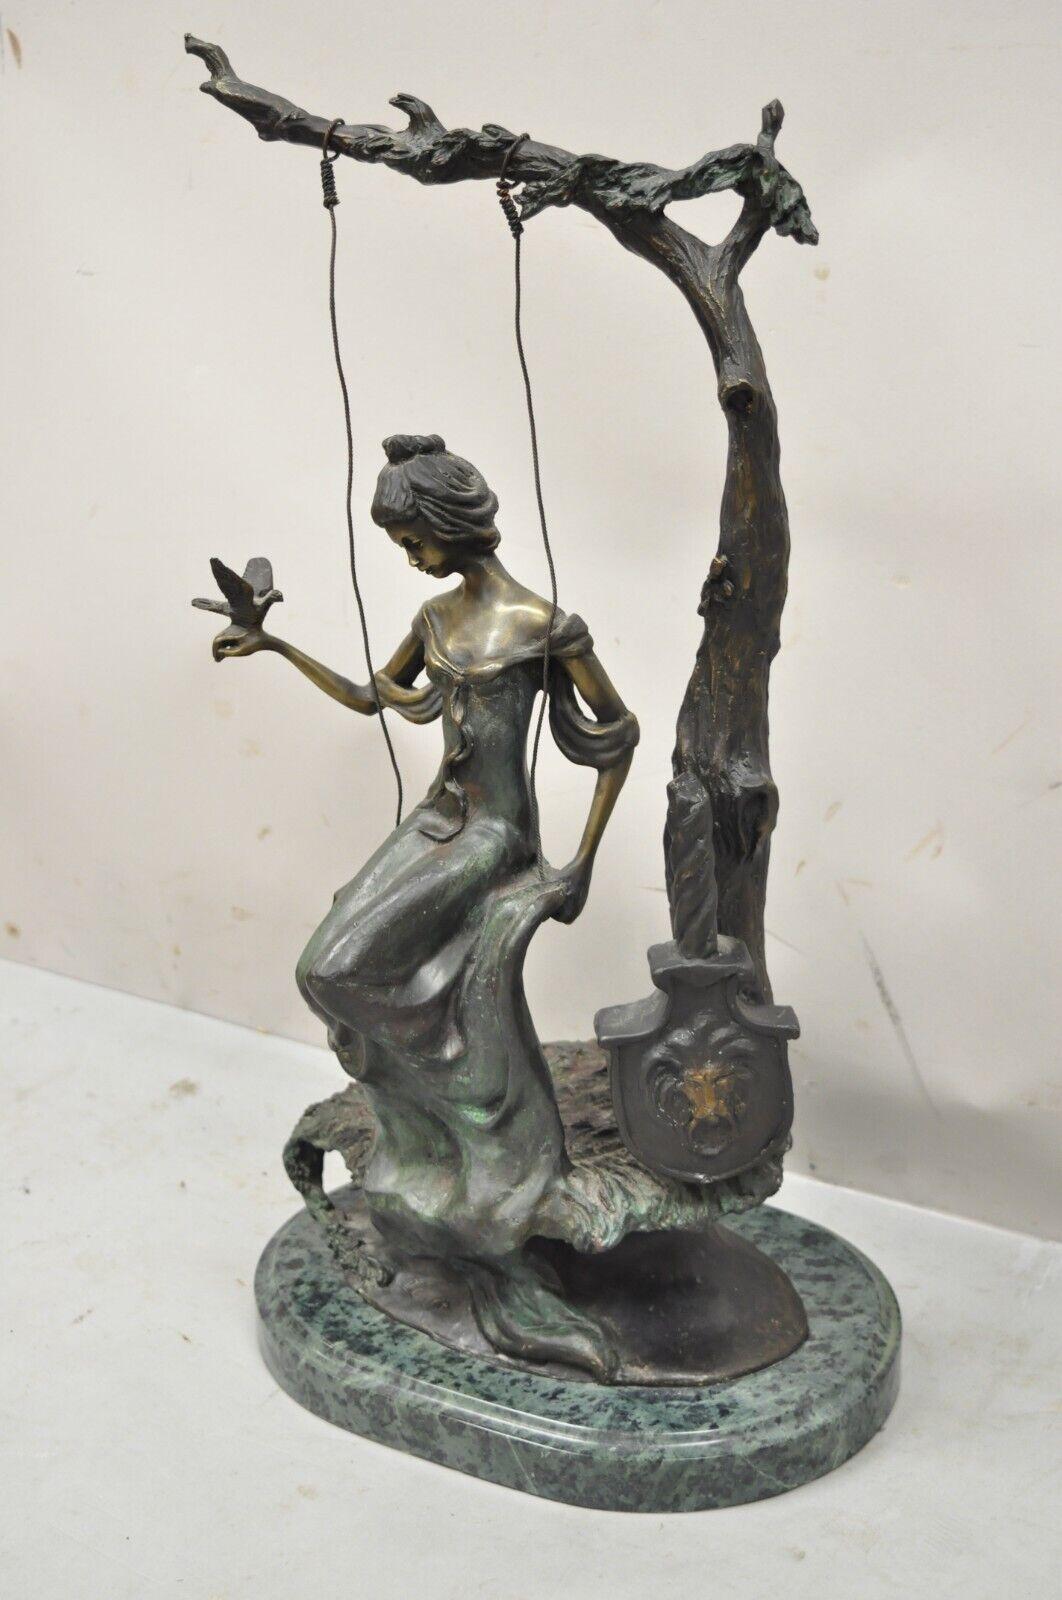 The Swing Bronze Statue on Marble Base after Louis Icart (1888-1950). Item features cast bronze woman maiden on swing with green patination and marble base, very nice item, great style and form, sculped after Louis Icart. Circa late 20th century.